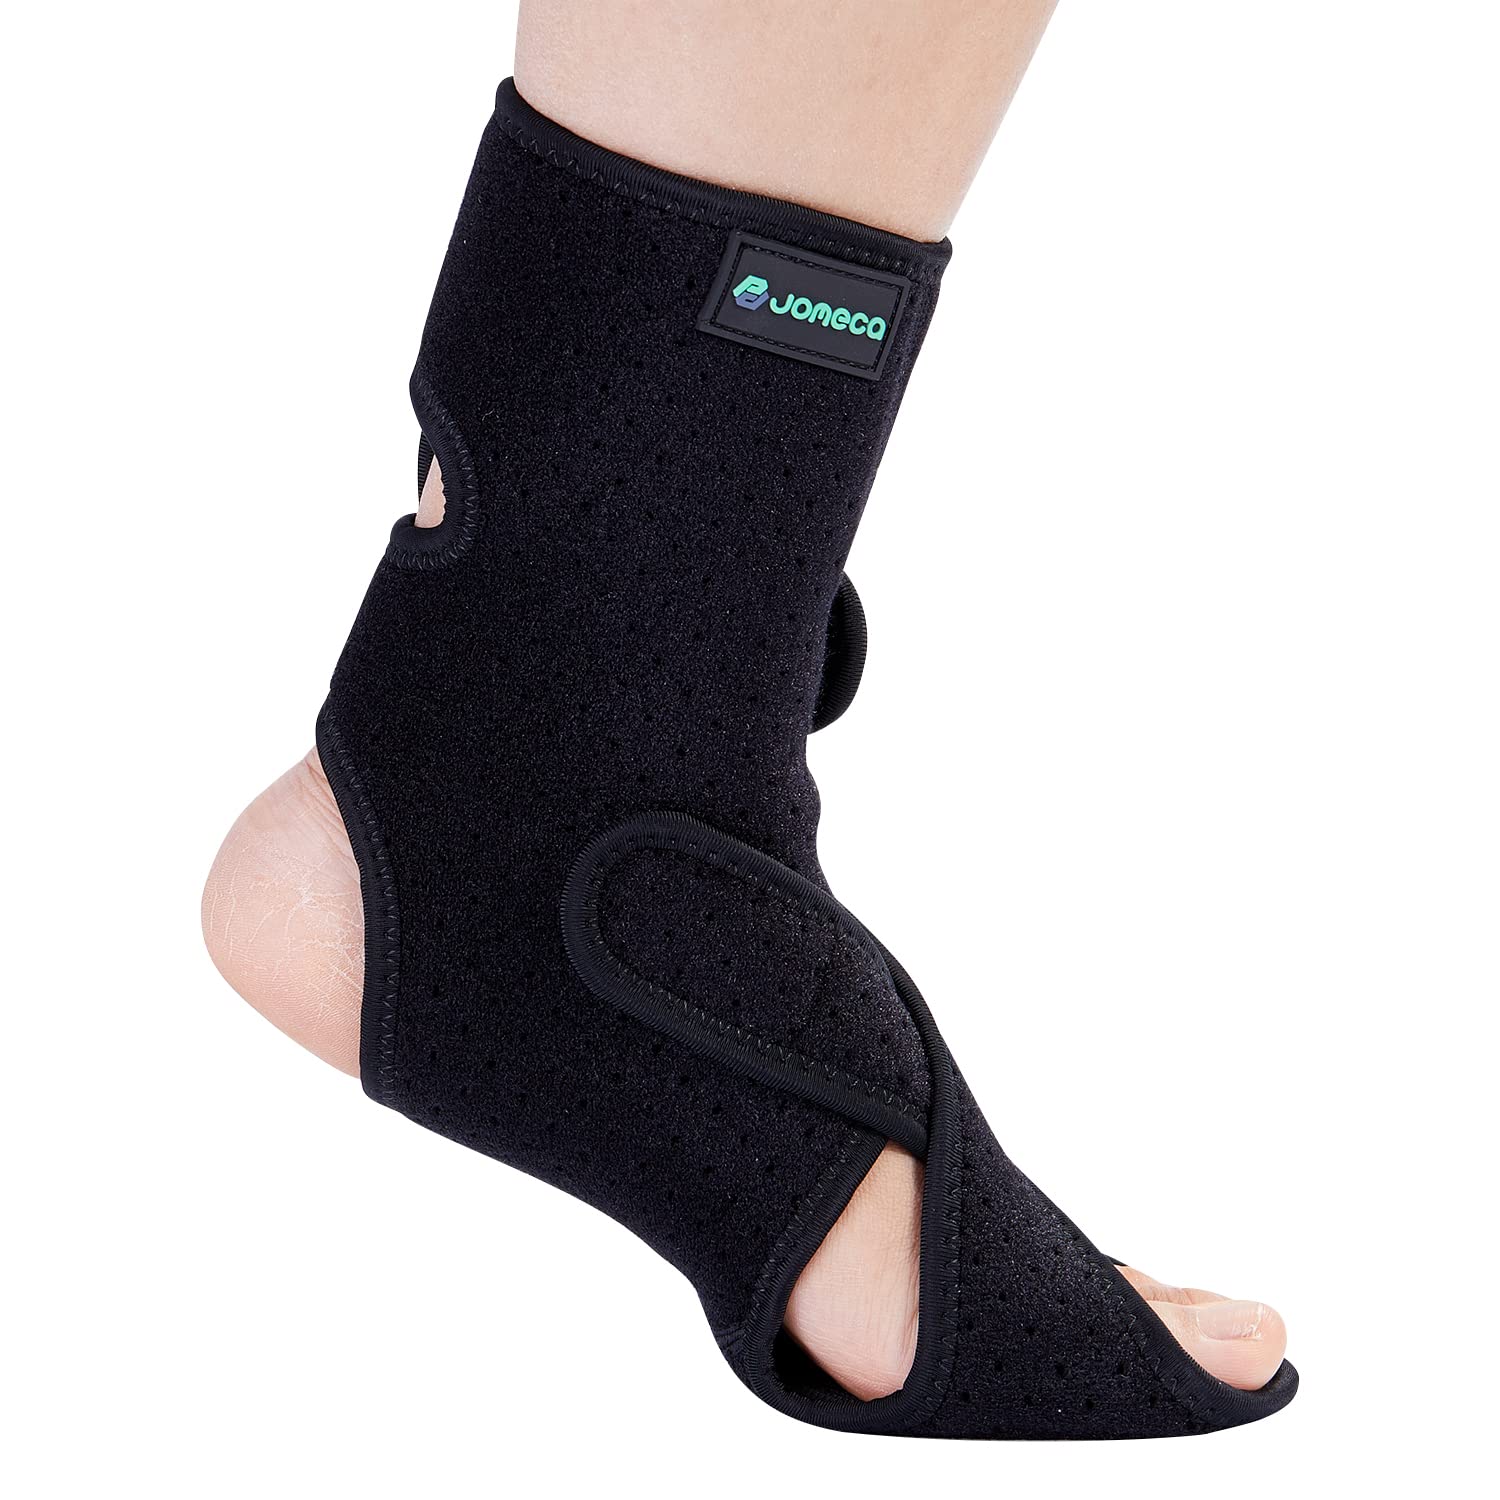 JOMECA Drop Foot Brace with Arch Support, Medical Grade Adjustable